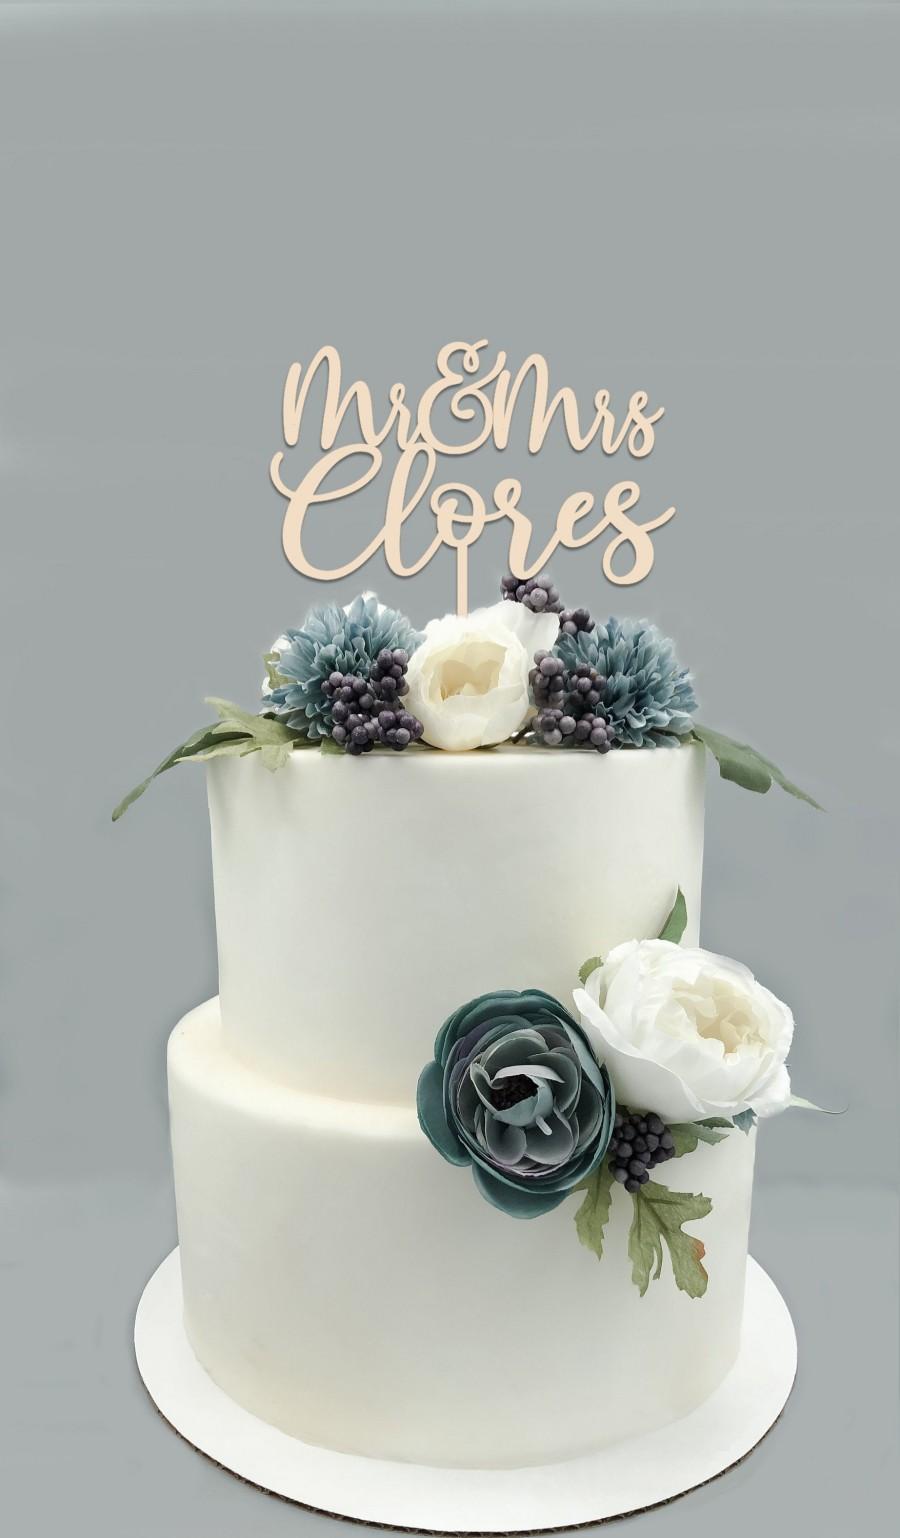 Details about   Mr & Mrs Wedding Cake Topper Personalized With Last Name Love Party Decoration 